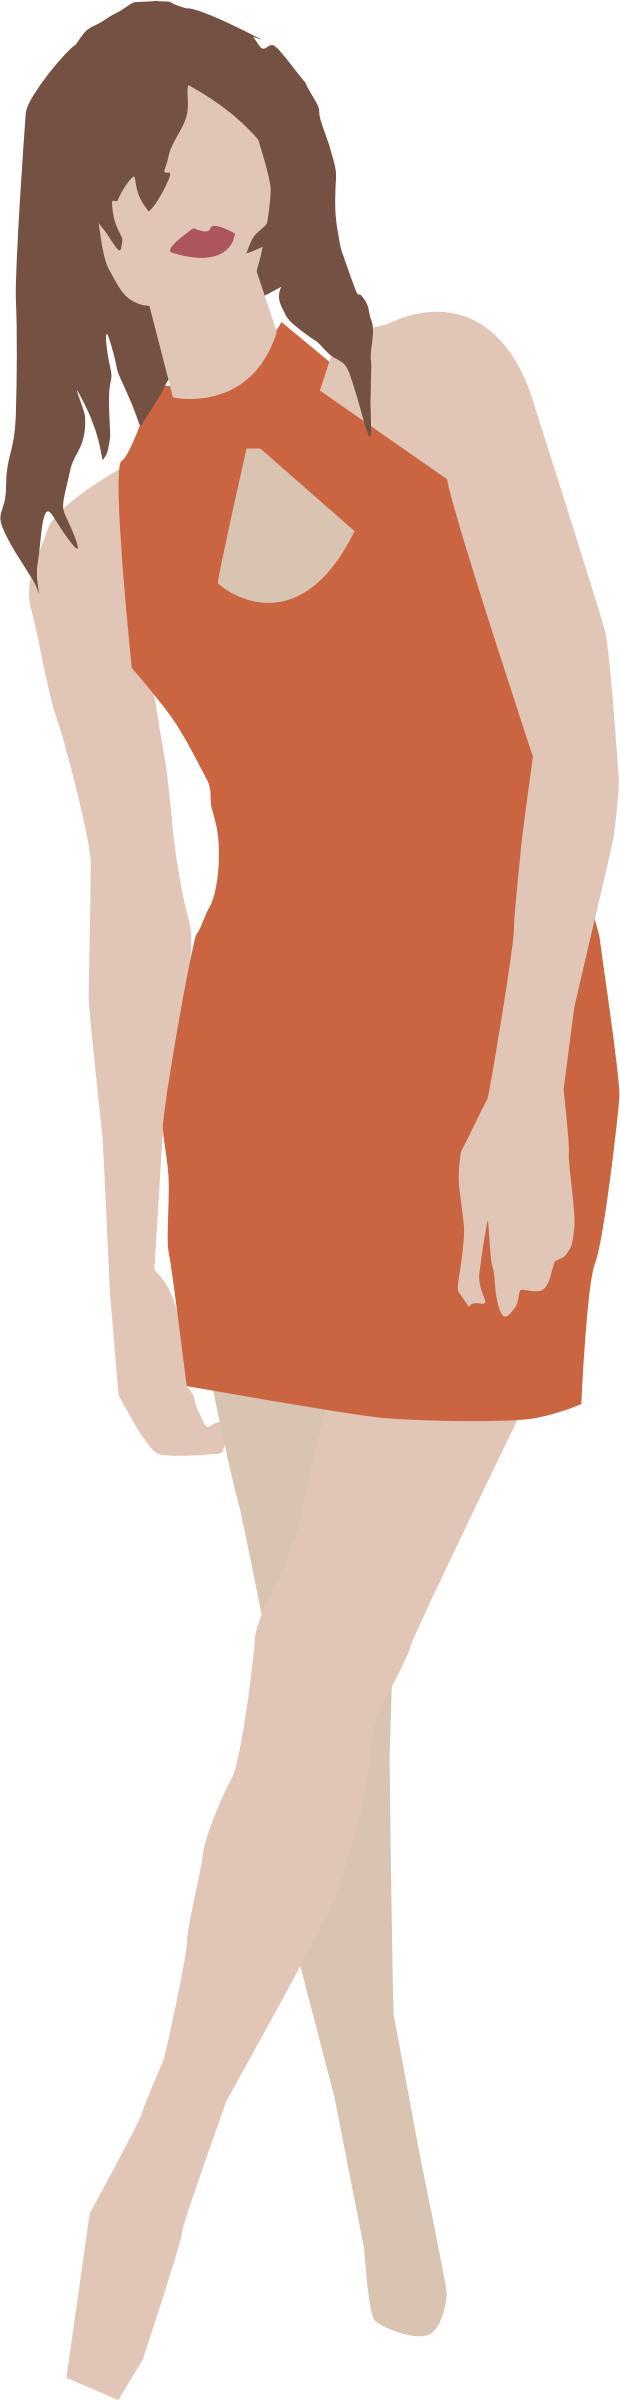 Girl in simple dress png transparent